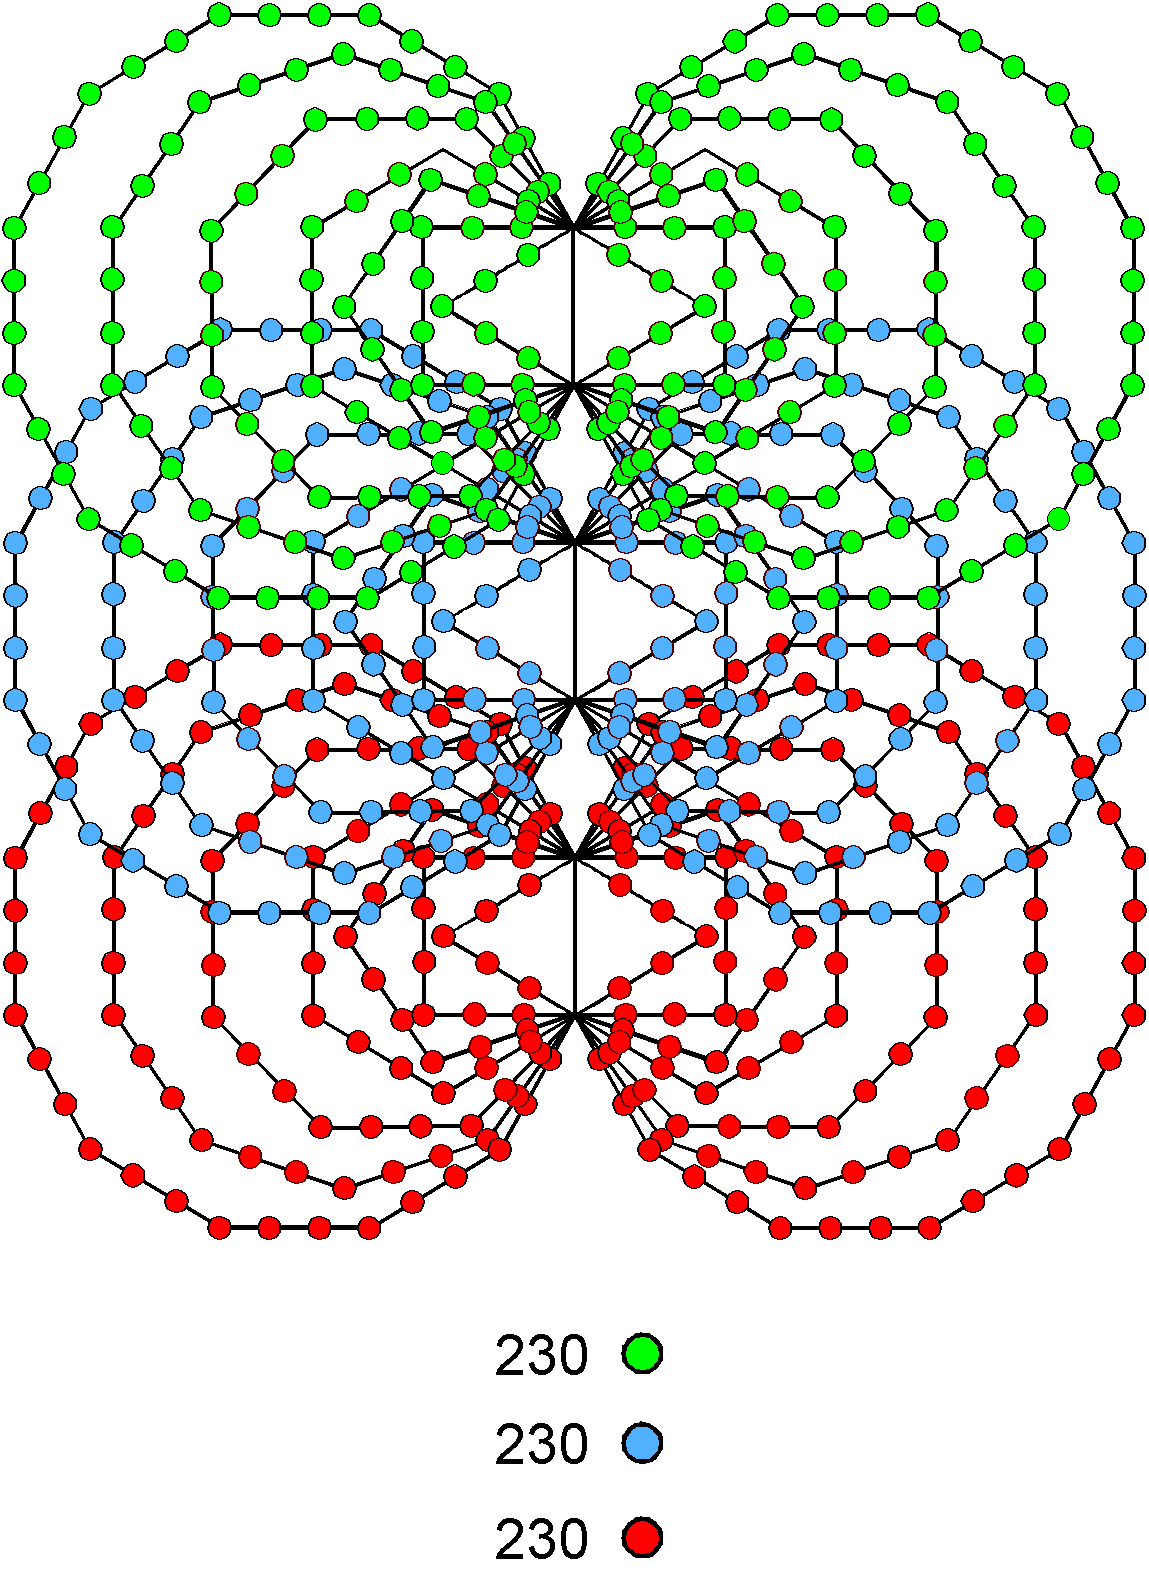 230 boundary yods per set of 14 polygons